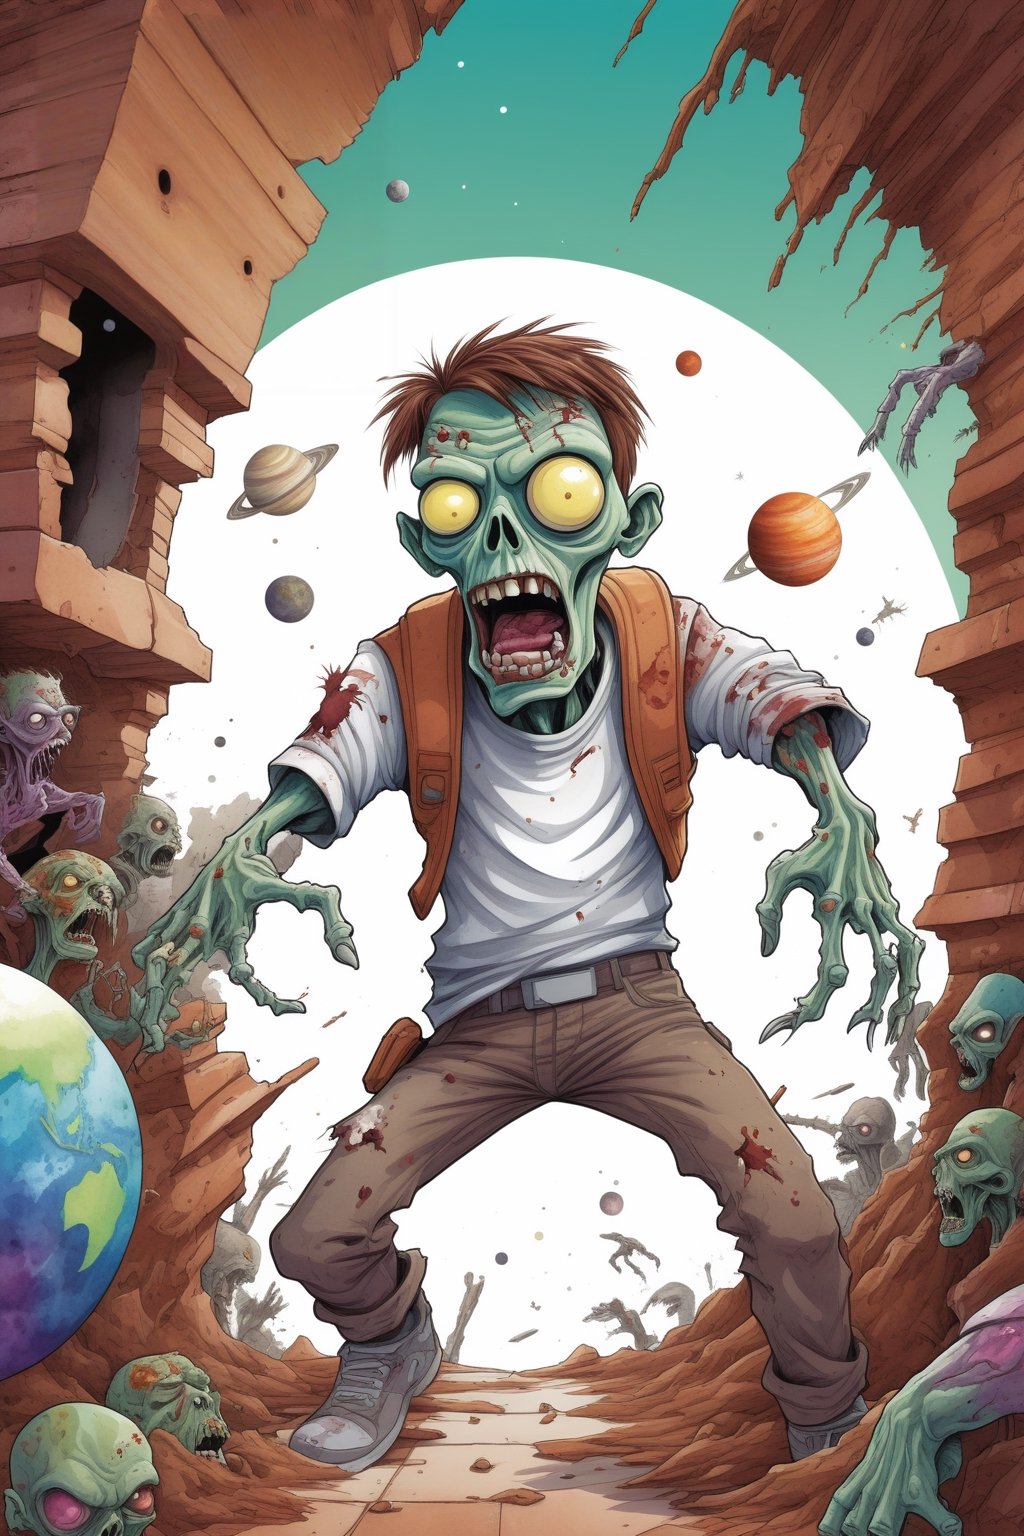 Humorous sci-fi vector poster in cedar brown and white color palette. Watercolor effect. Funny cartoon zombie cyborg character slamming into a wall, causing his head to break apart. In the background, reveal a vibrant planet inhabited by various creatures. Detailed illustration by renowned artists such as Andy Ranamanolisa and Matt Dixon.